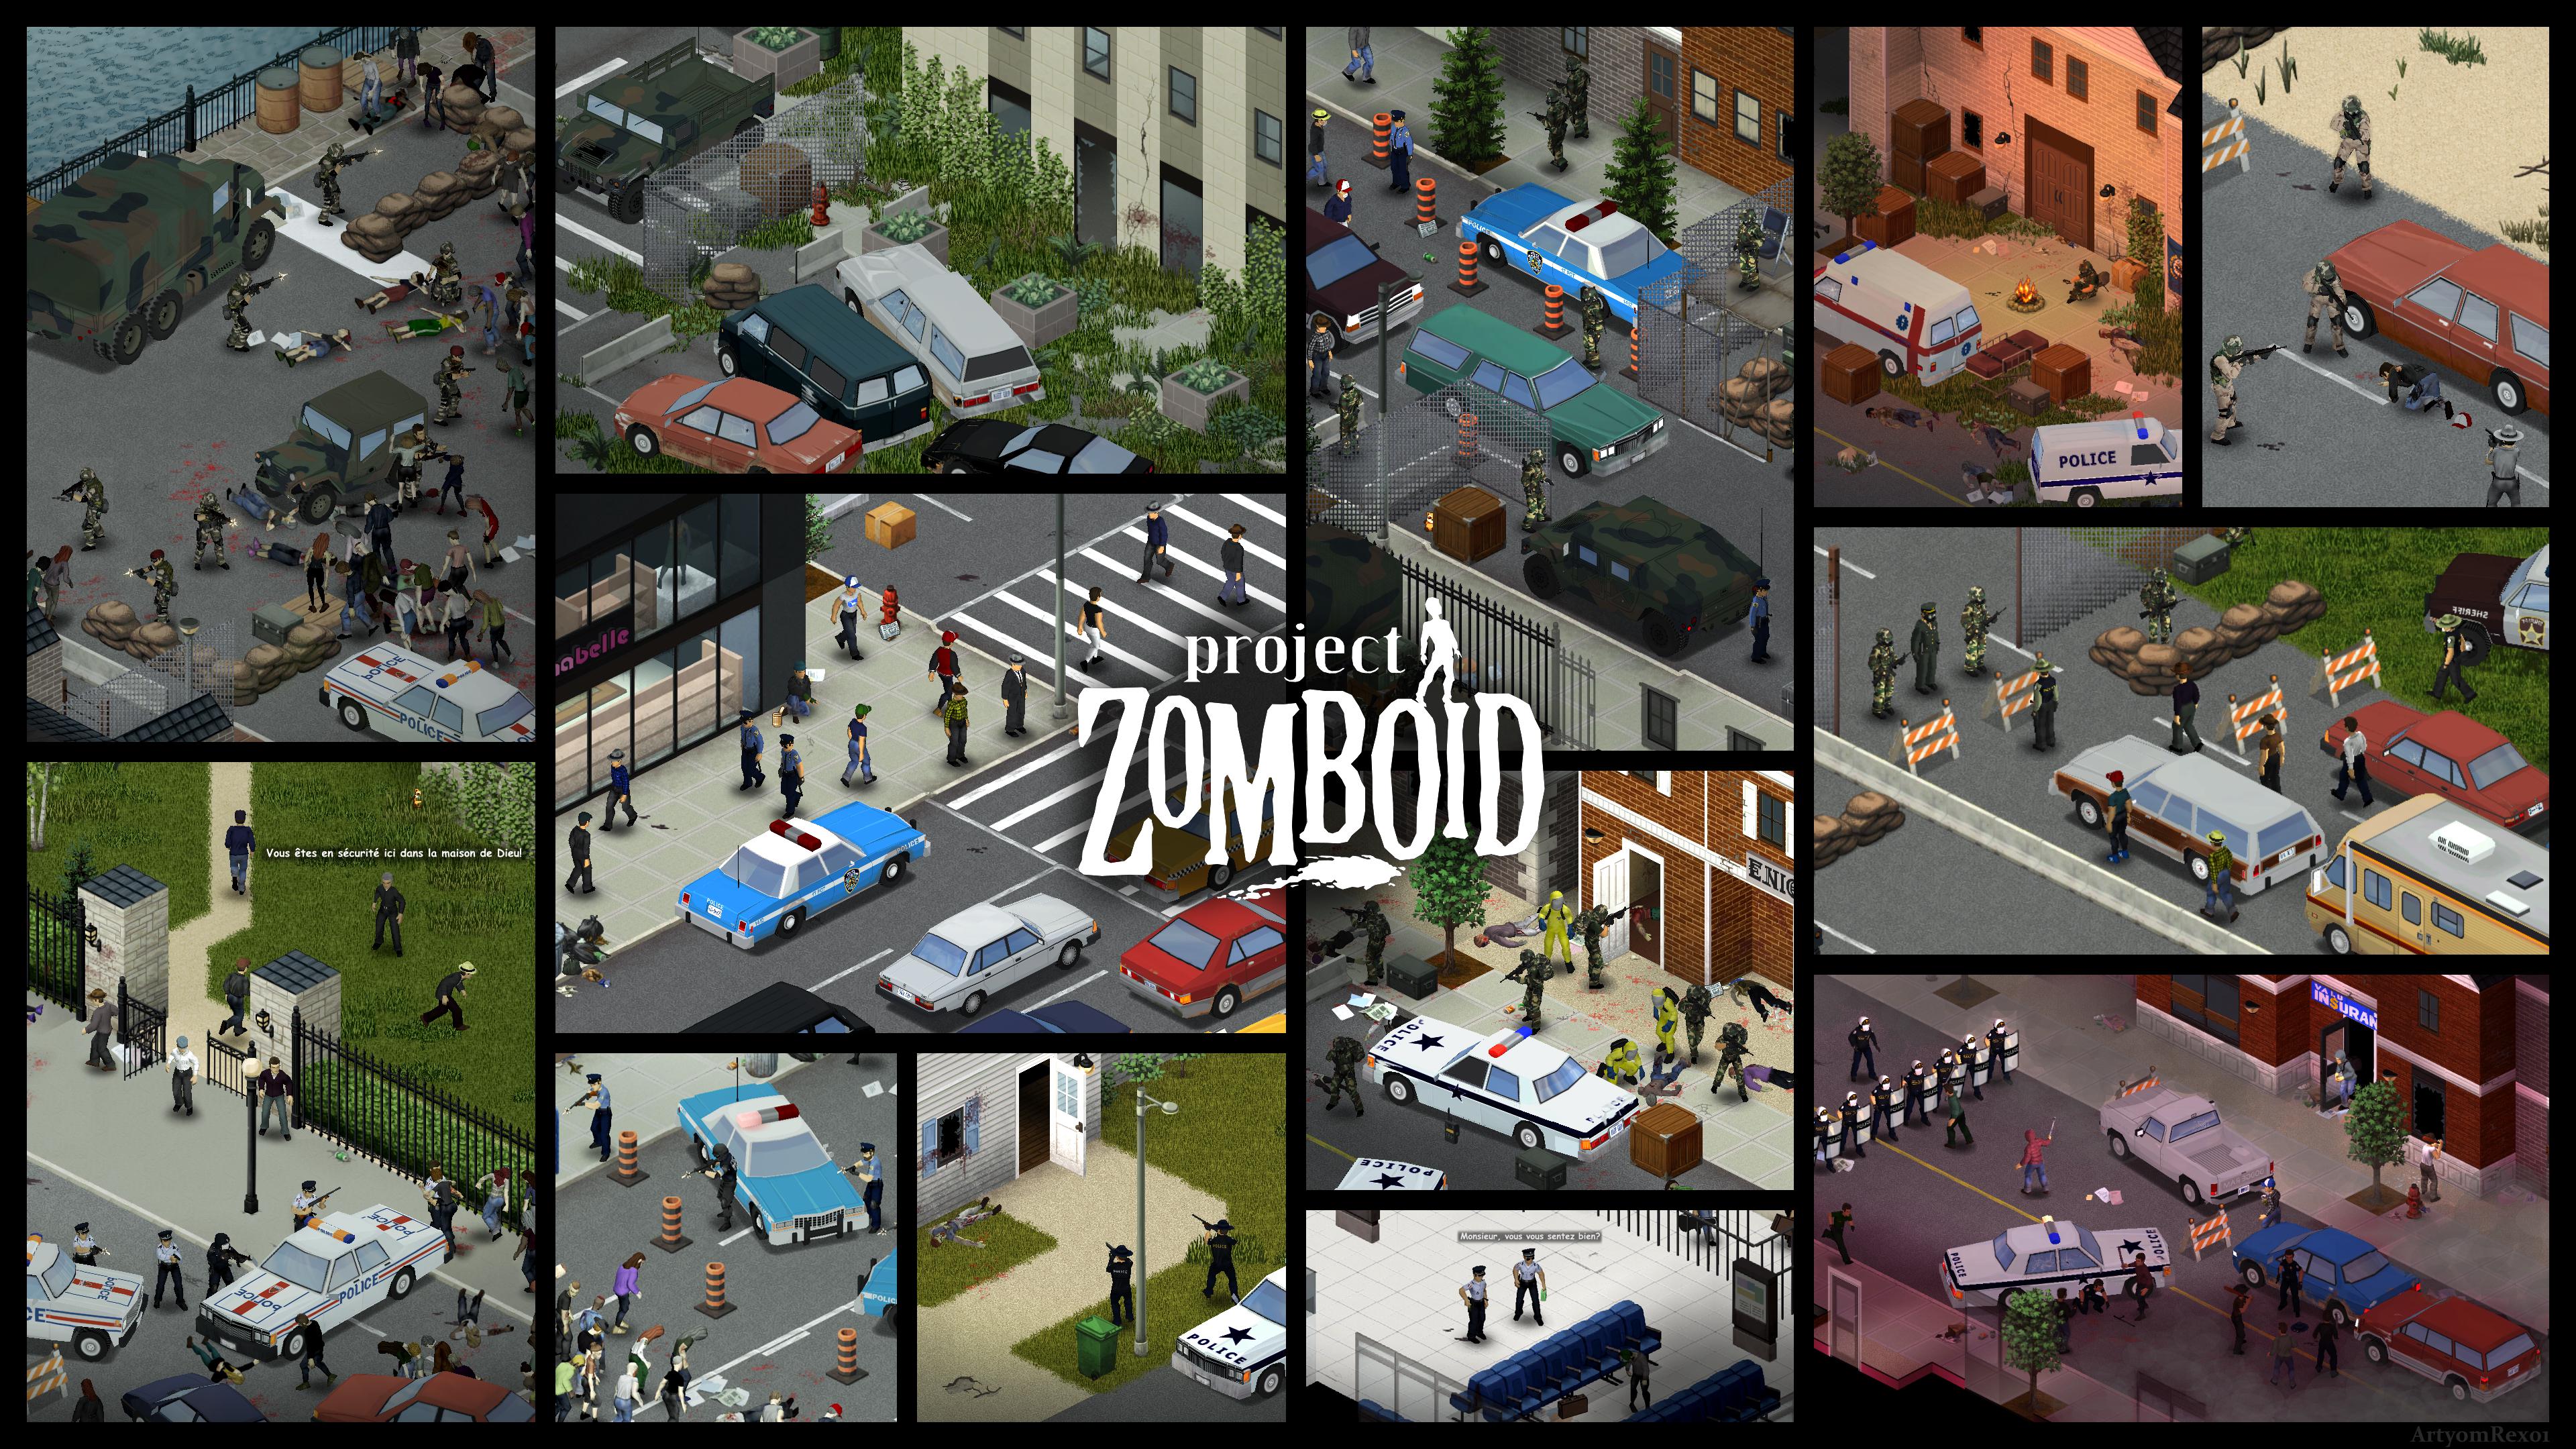 Project zomboid wallpaper 2560x1440 and 3840x2160